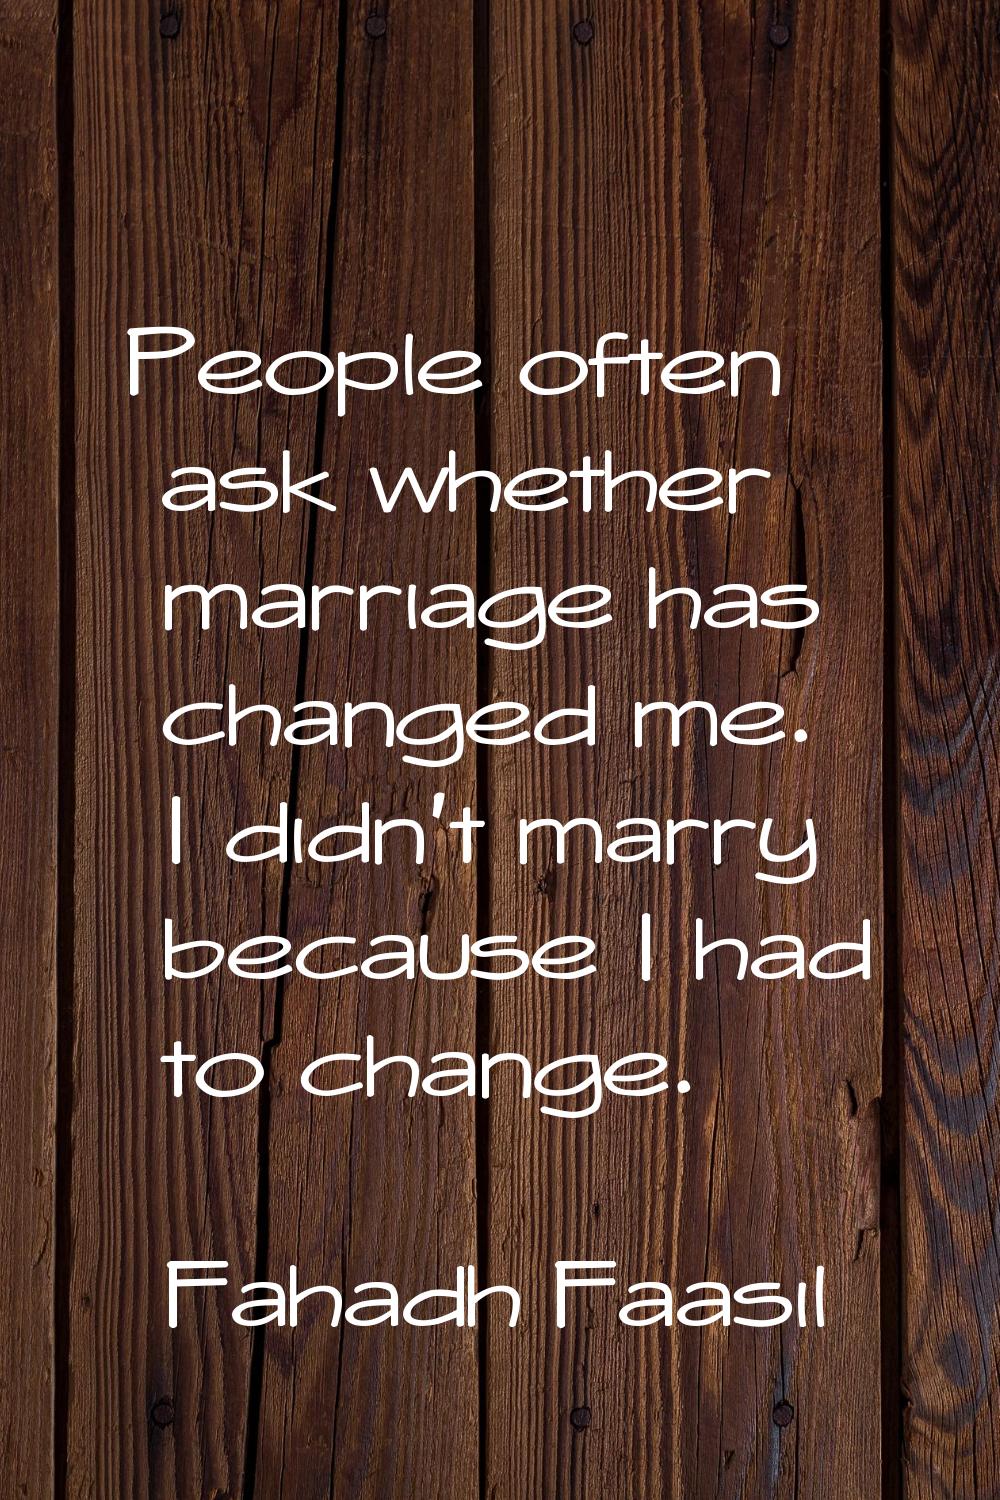 People often ask whether marriage has changed me. I didn't marry because I had to change.